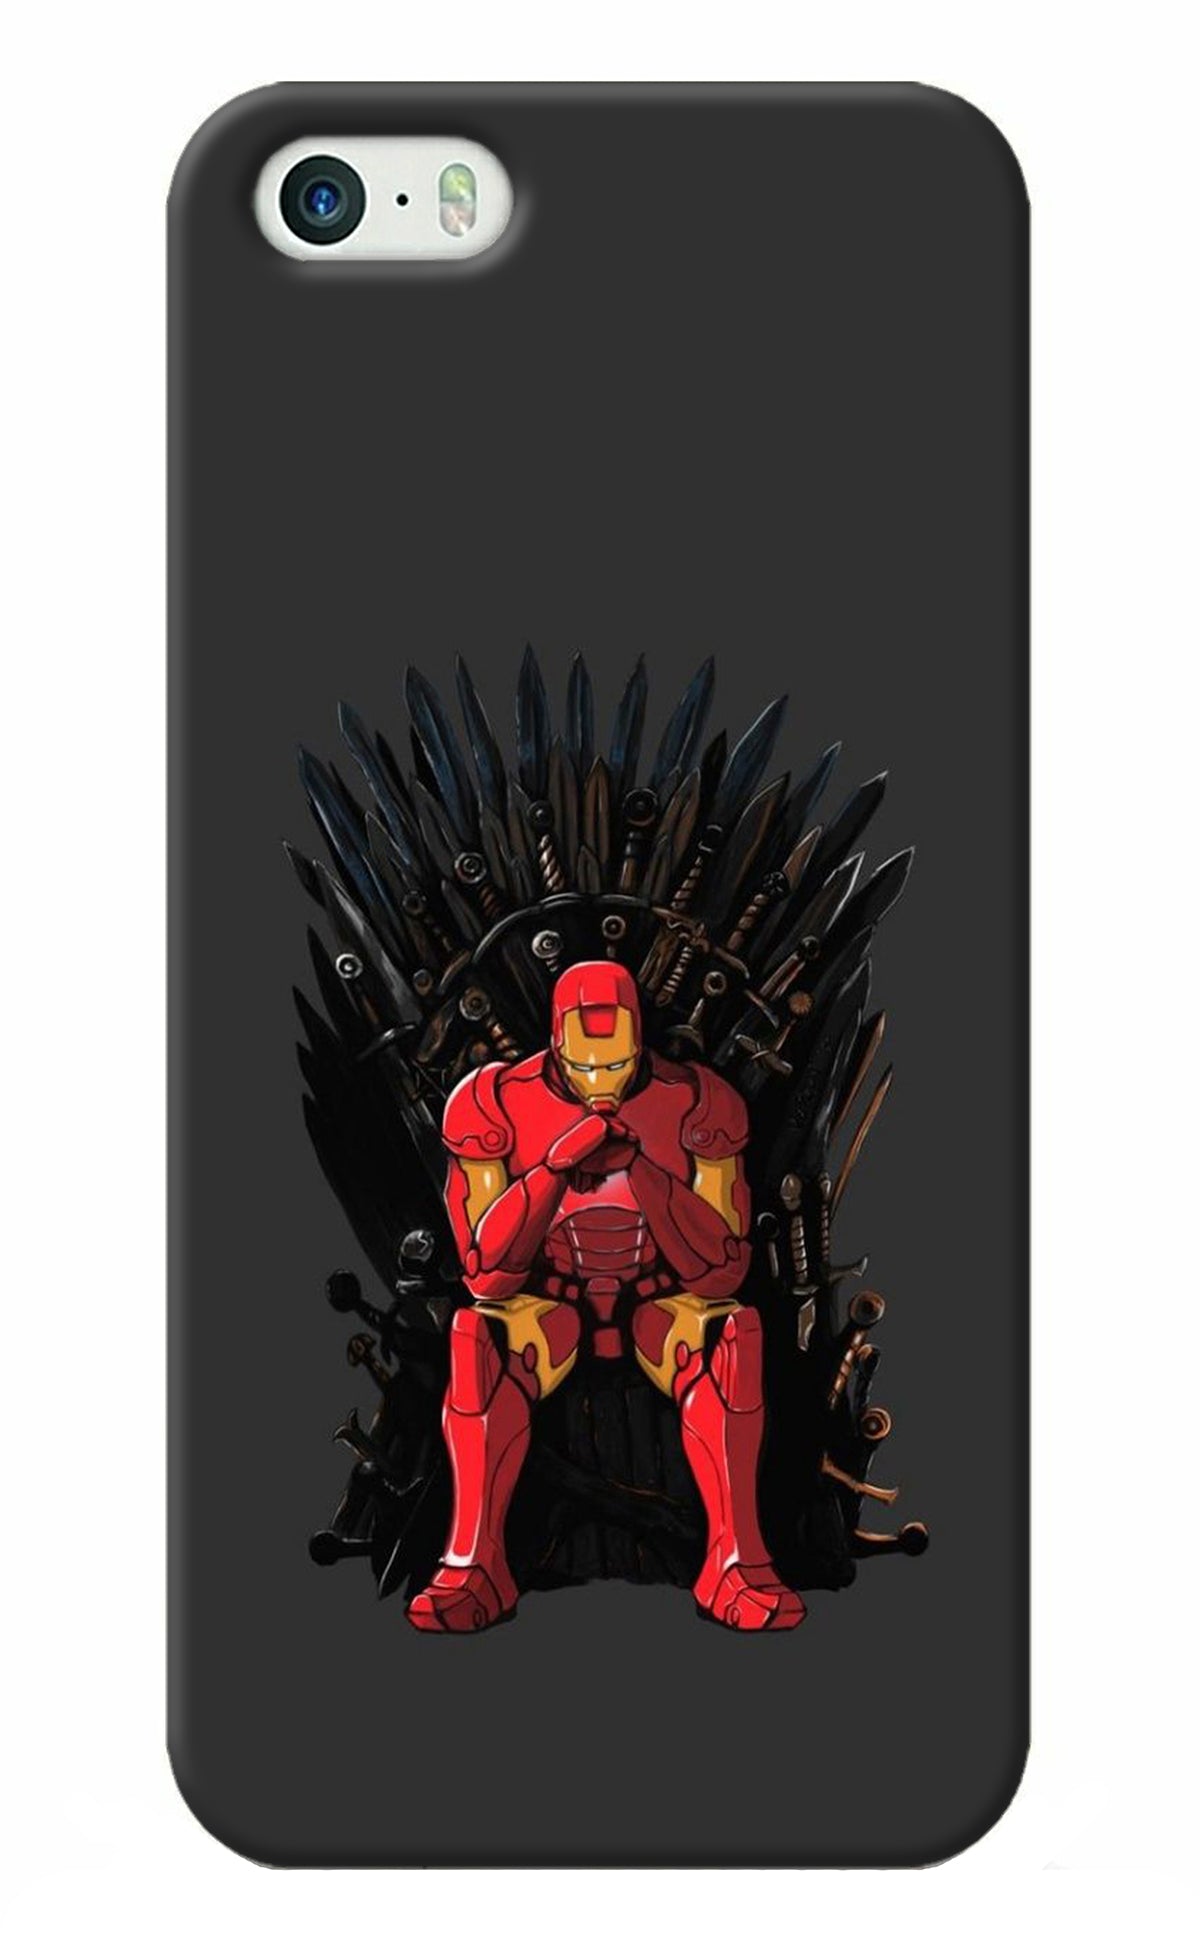 Ironman Throne iPhone 5/5s Back Cover